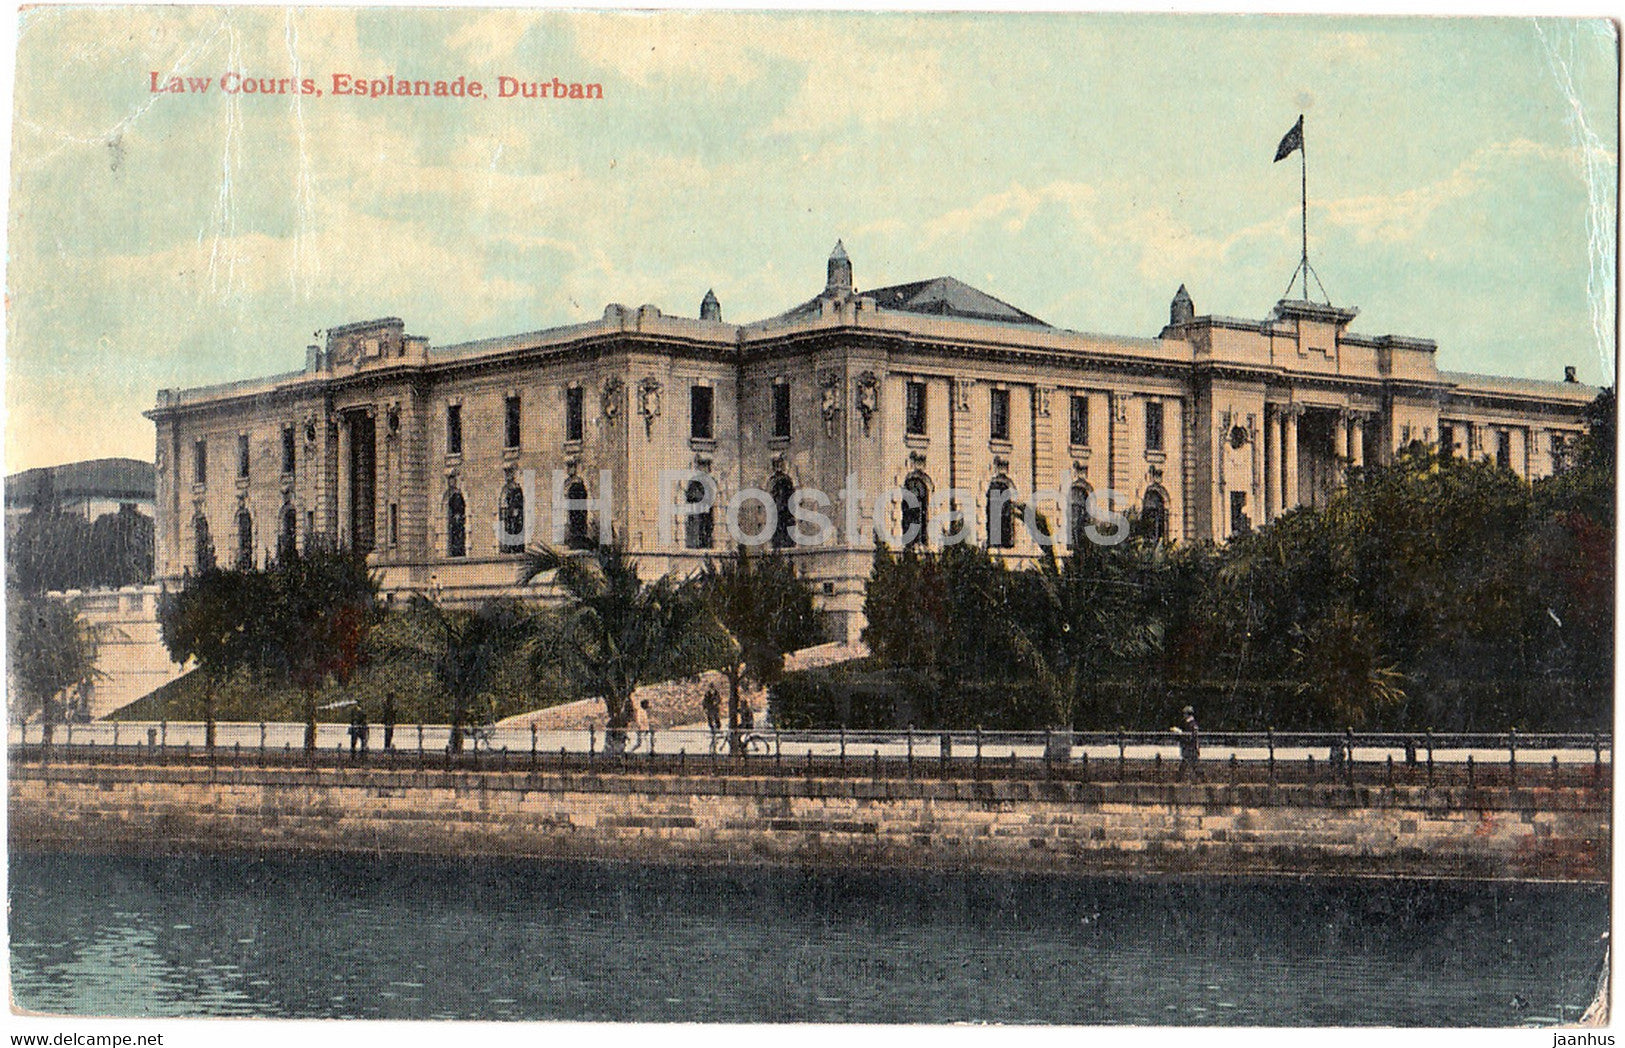 Durban - Law Courts - Esplanade - 98554 - old postcard - 1923 - South Africa - used - JH Postcards